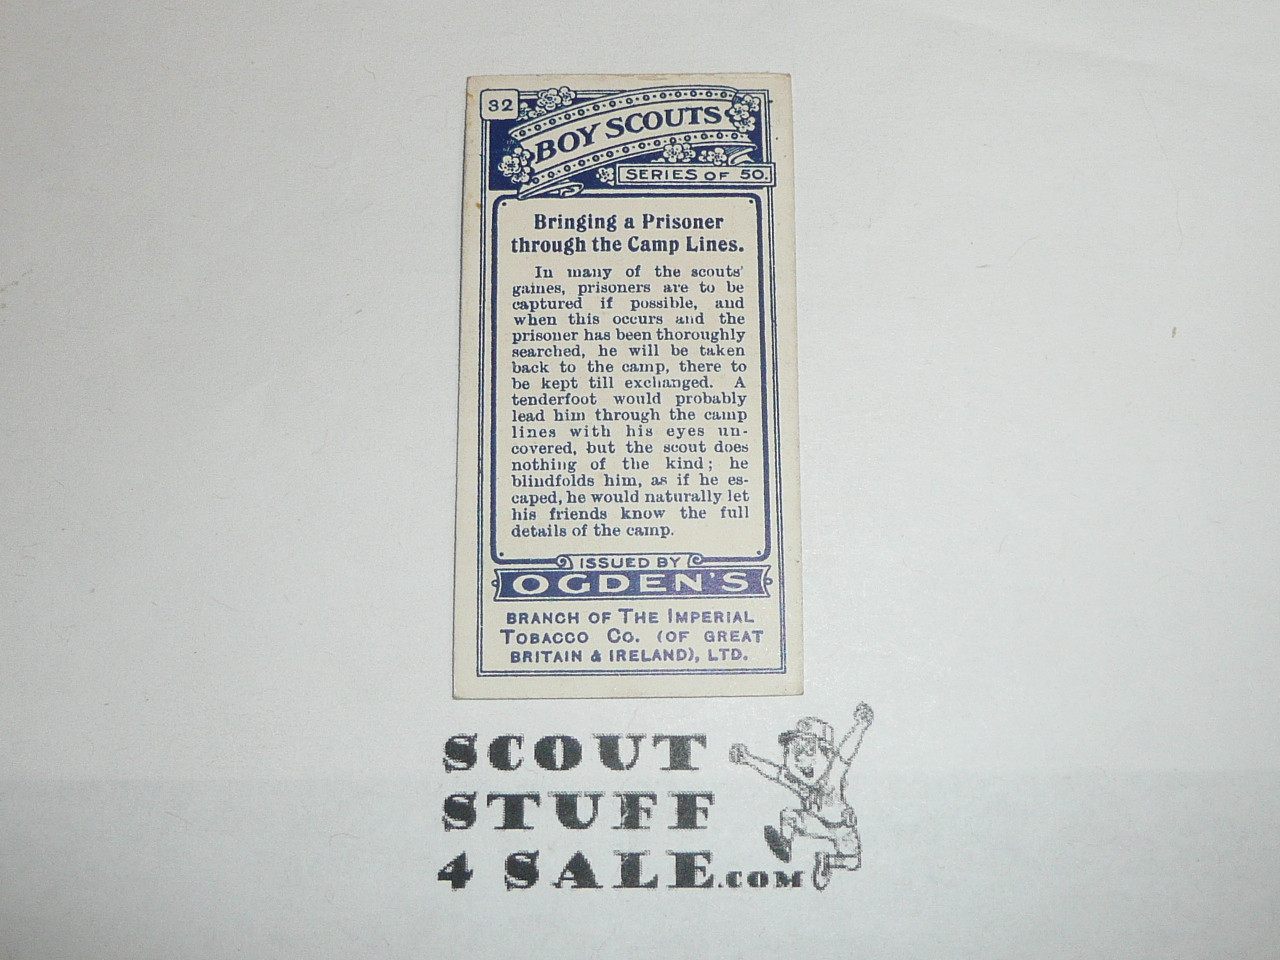 Ogden Tabacco Company Premium Card, First Boy Scout Series of 50 (Blue Backs), Card #33 Bringing a Prisoner Through the Camp Lines, 1911